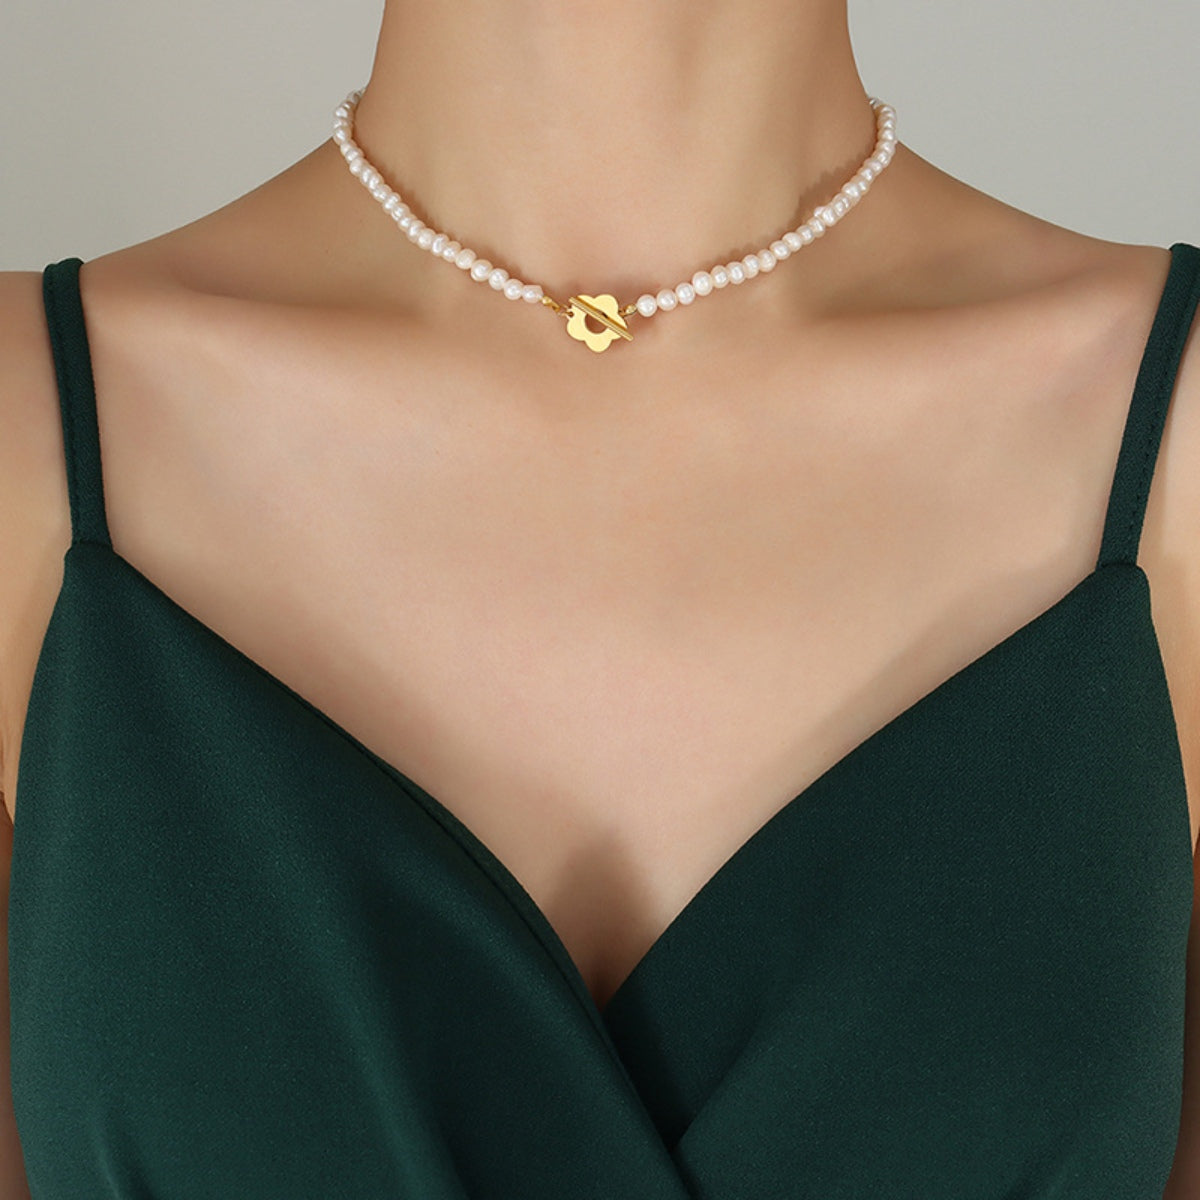 Best Gold Pearl Chain Necklace Jewelry Gift | Best Aesthetic Yellow Gold Flower Pearl Chain Necklace Jewelry Gift for Women, Girls, Girlfriend, Mother, Wife, Daughter | Mason & Madison Co.